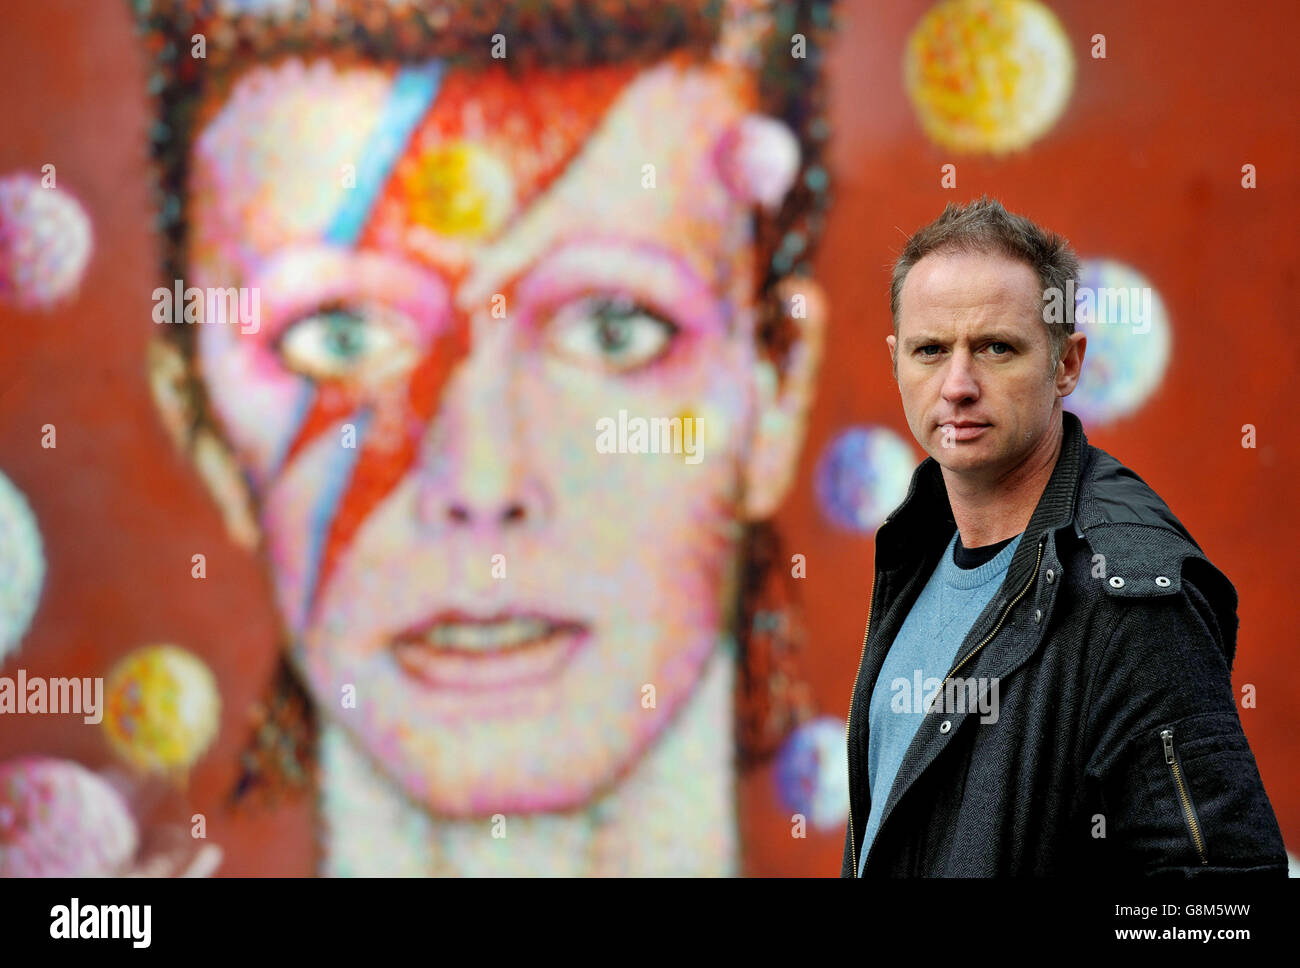 Artist Jimmy C, stands in front of his David Bowie mural artwork on the wall of a Morley's store in Brixton, London, as he views flowers and tributes for the first time after returning from aboard, which have been left for the singer who died of cancer earlier this year. Stock Photo